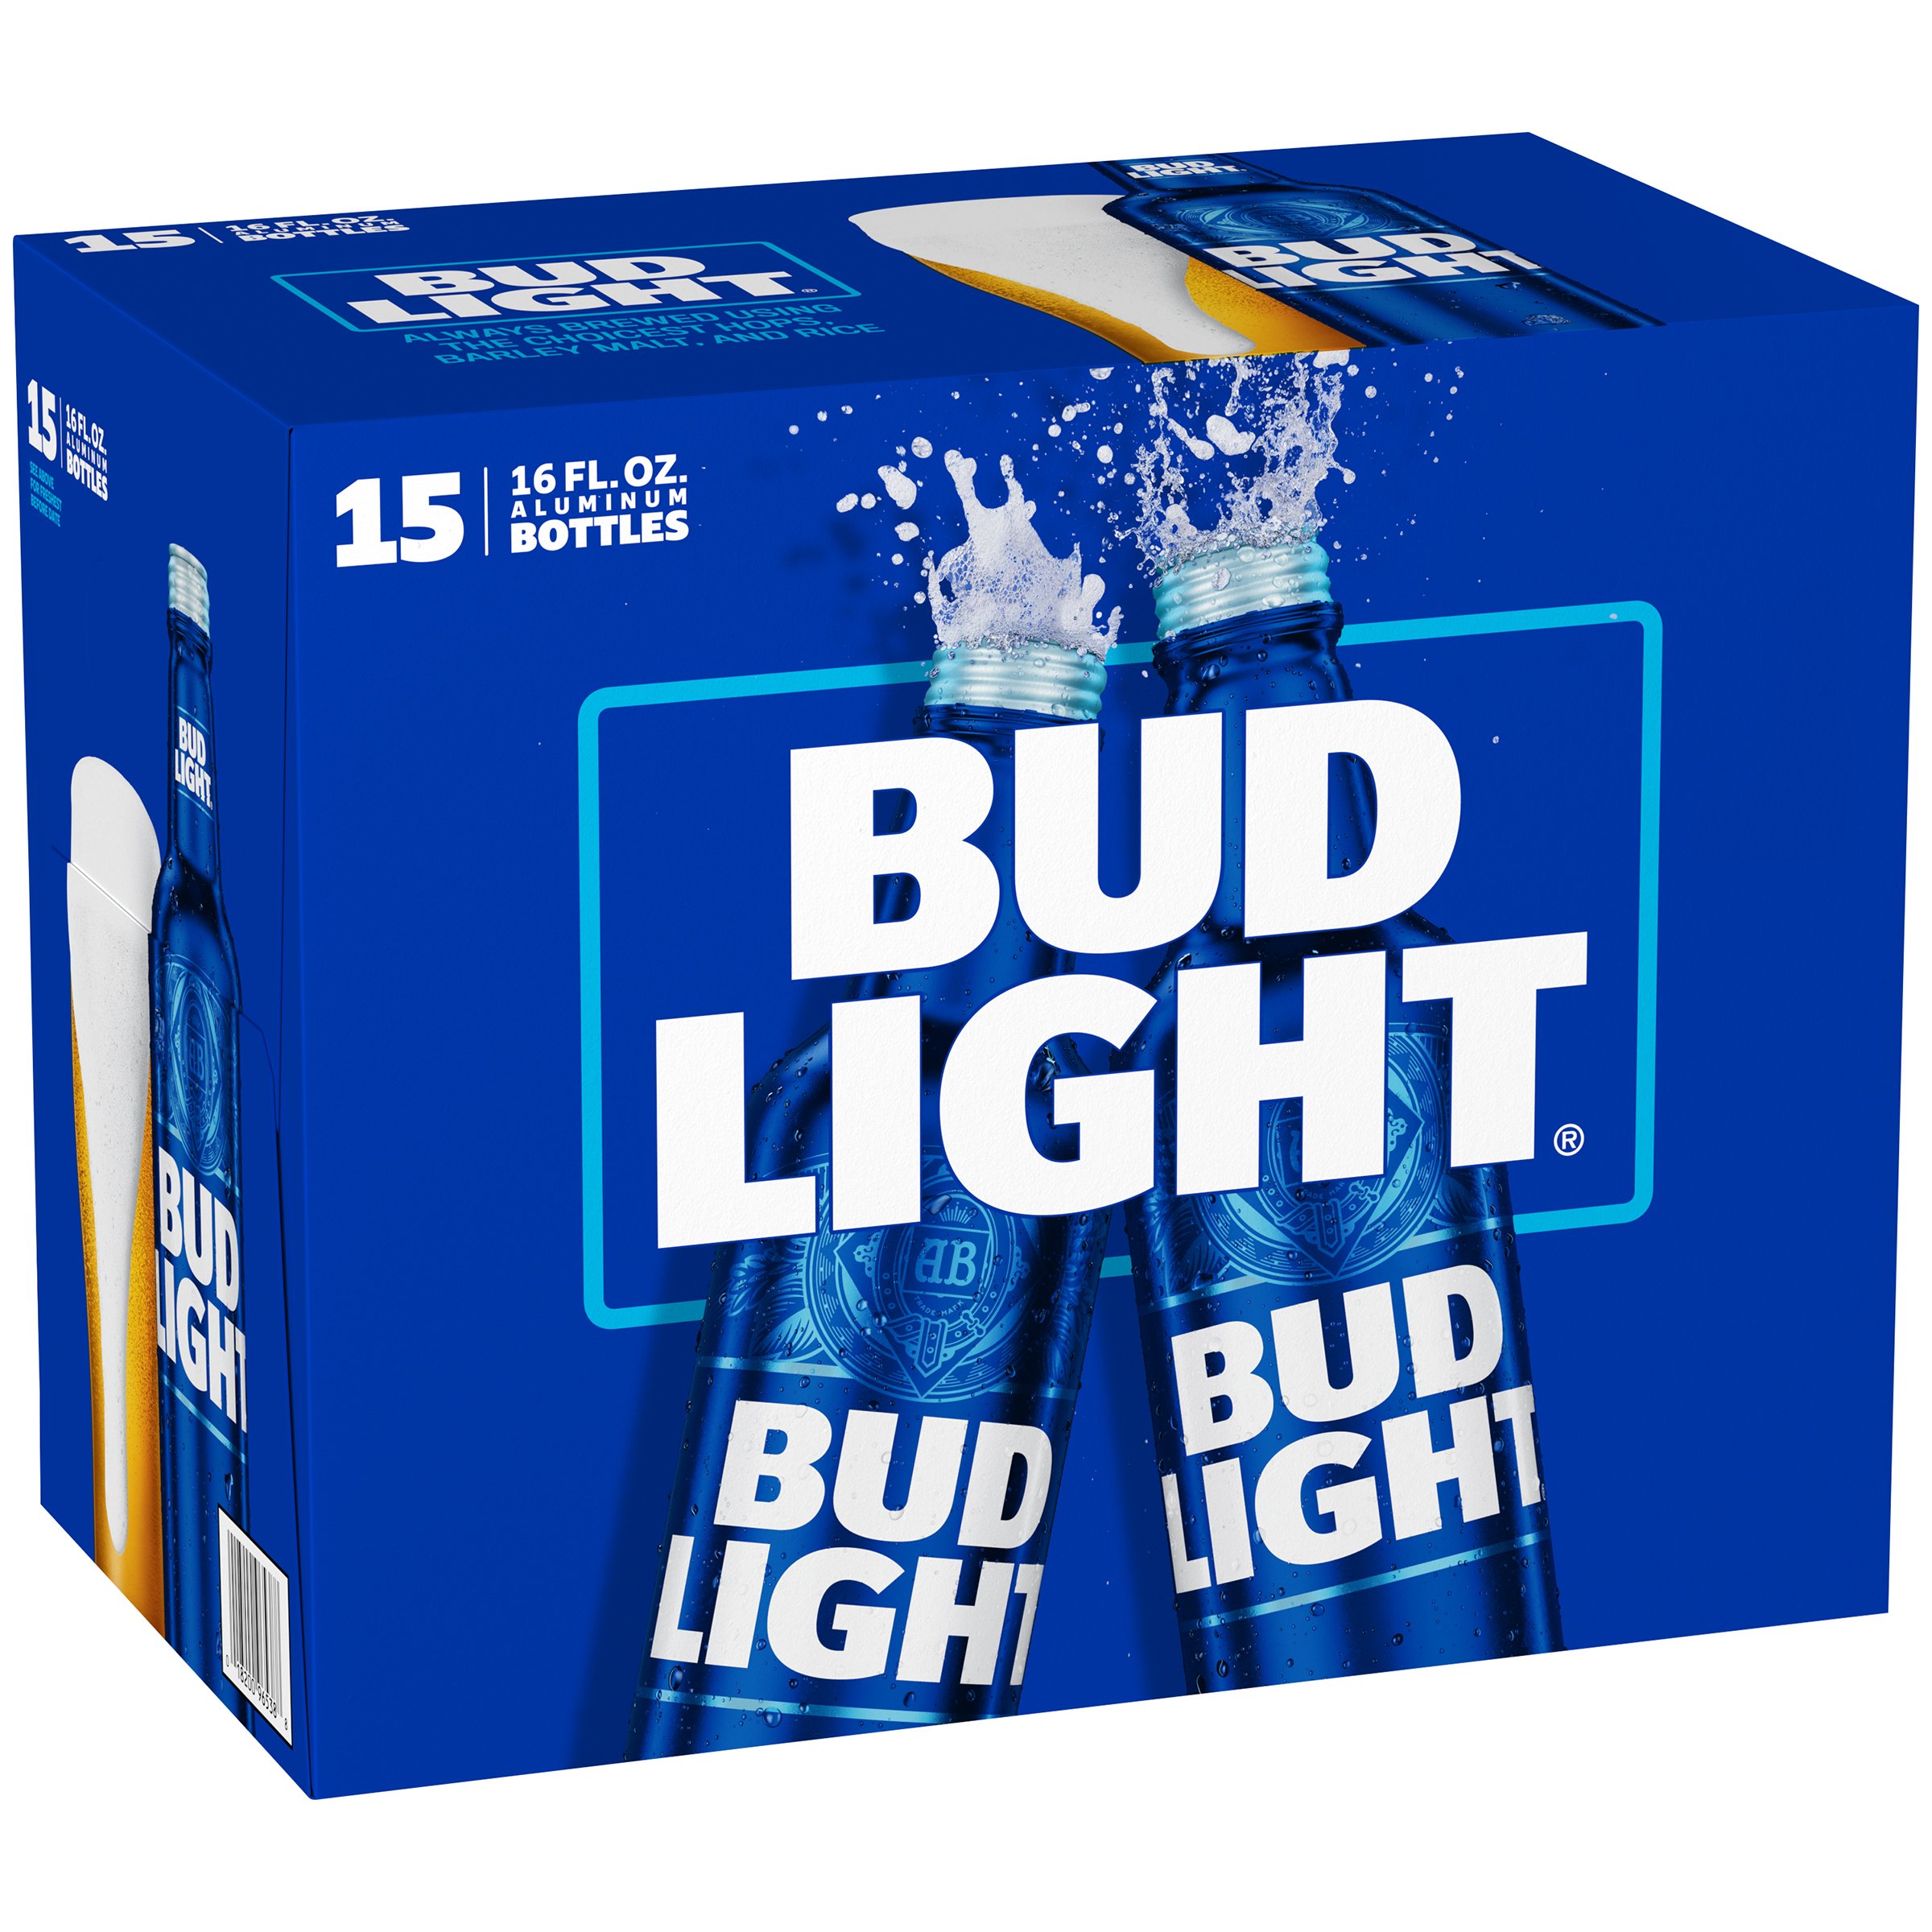 Free Shipping Details about   3 Blue Phillies Bud light Empty 16oz Aluminum Beer Bottles ‘07 